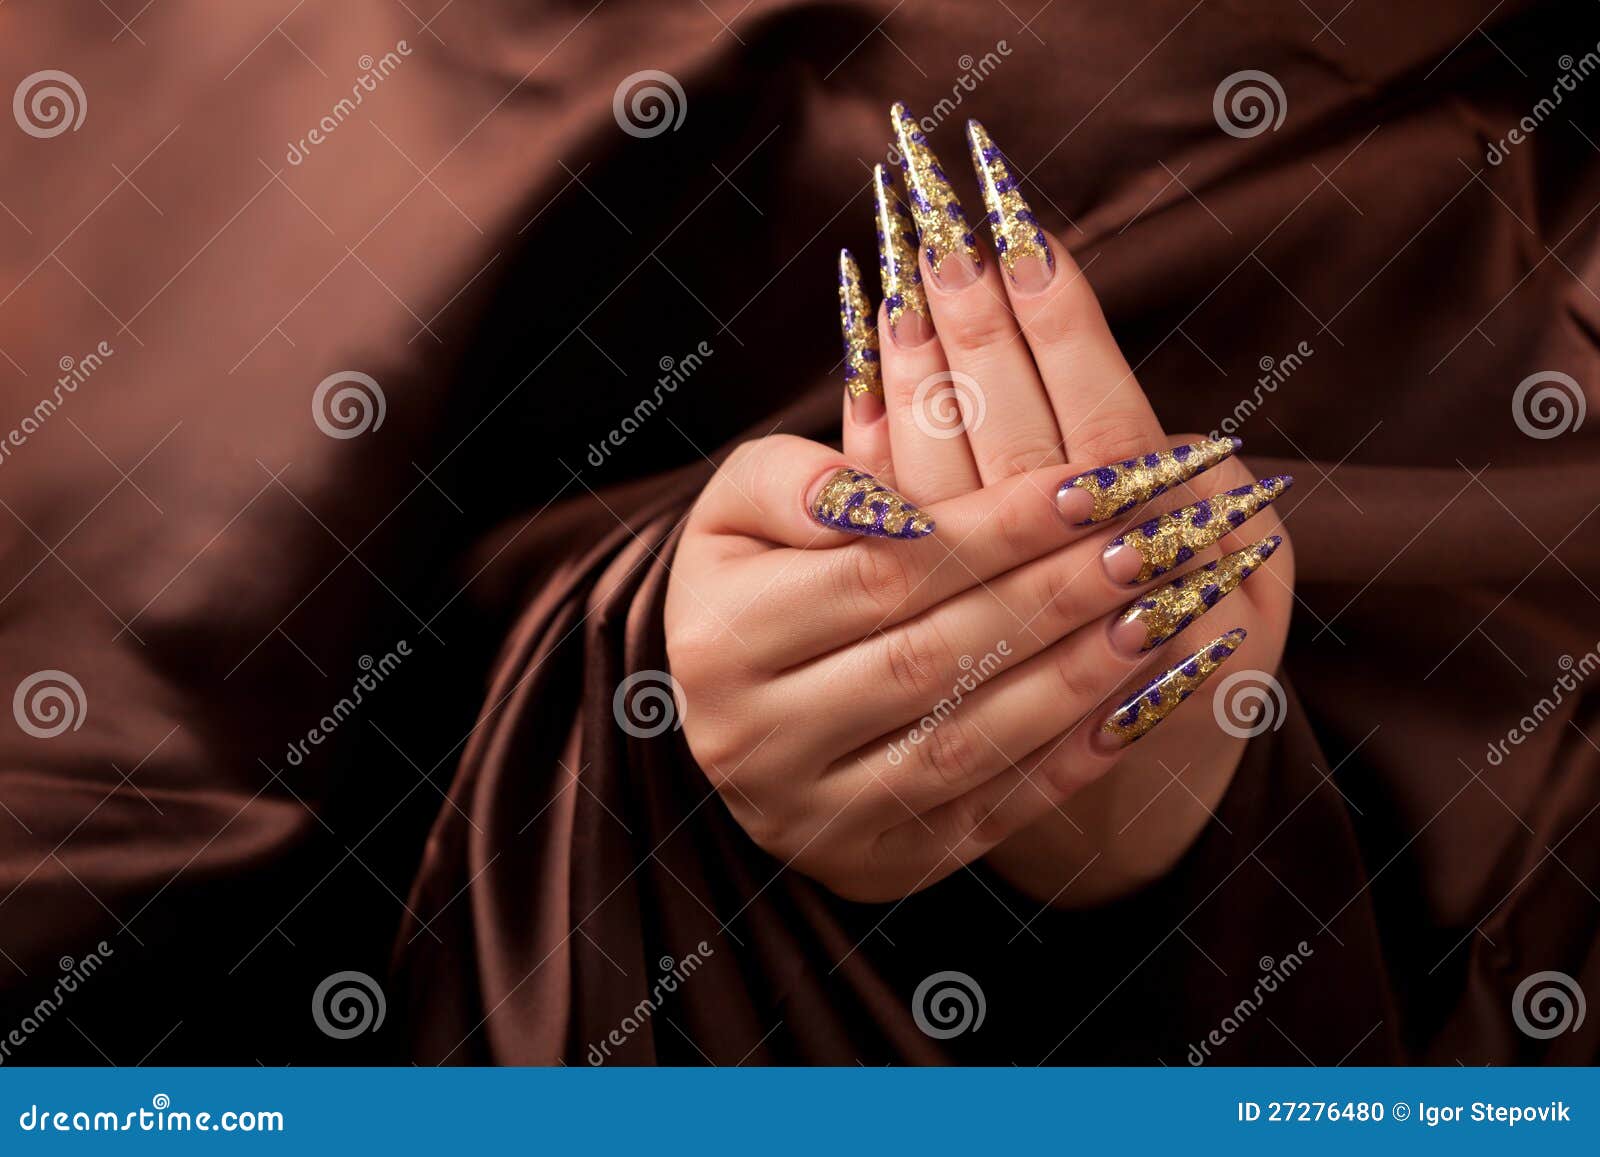 hands with long fingernail and beautiful manicure